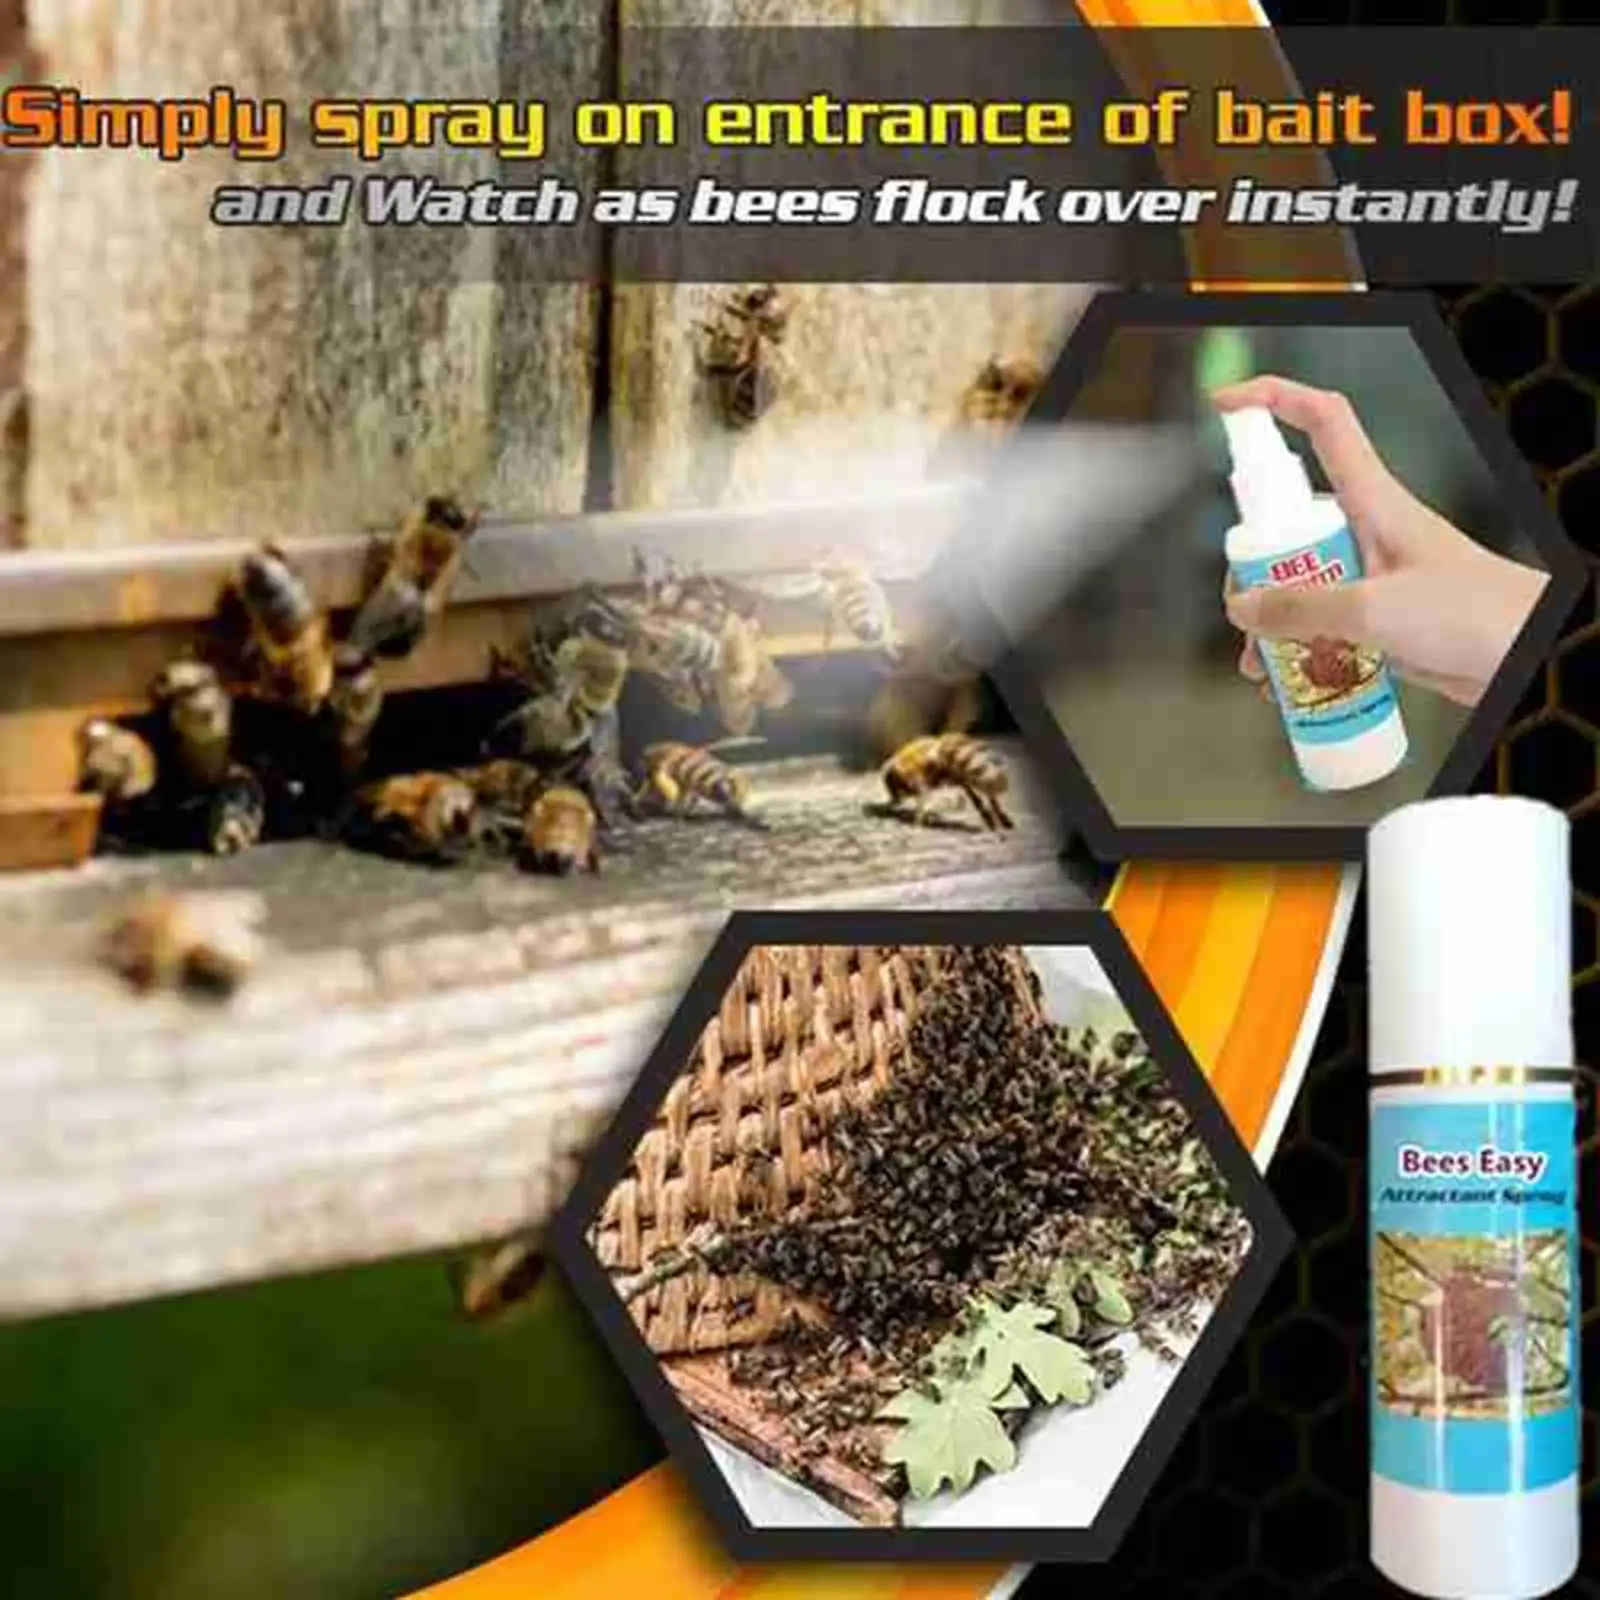 Bee Attractant Lure Stimulant Easy to Use Feeding Bee Nest Beekeeping Equipment Swarms Bee Trap Swarm Lure Trap Bait for Outdoor